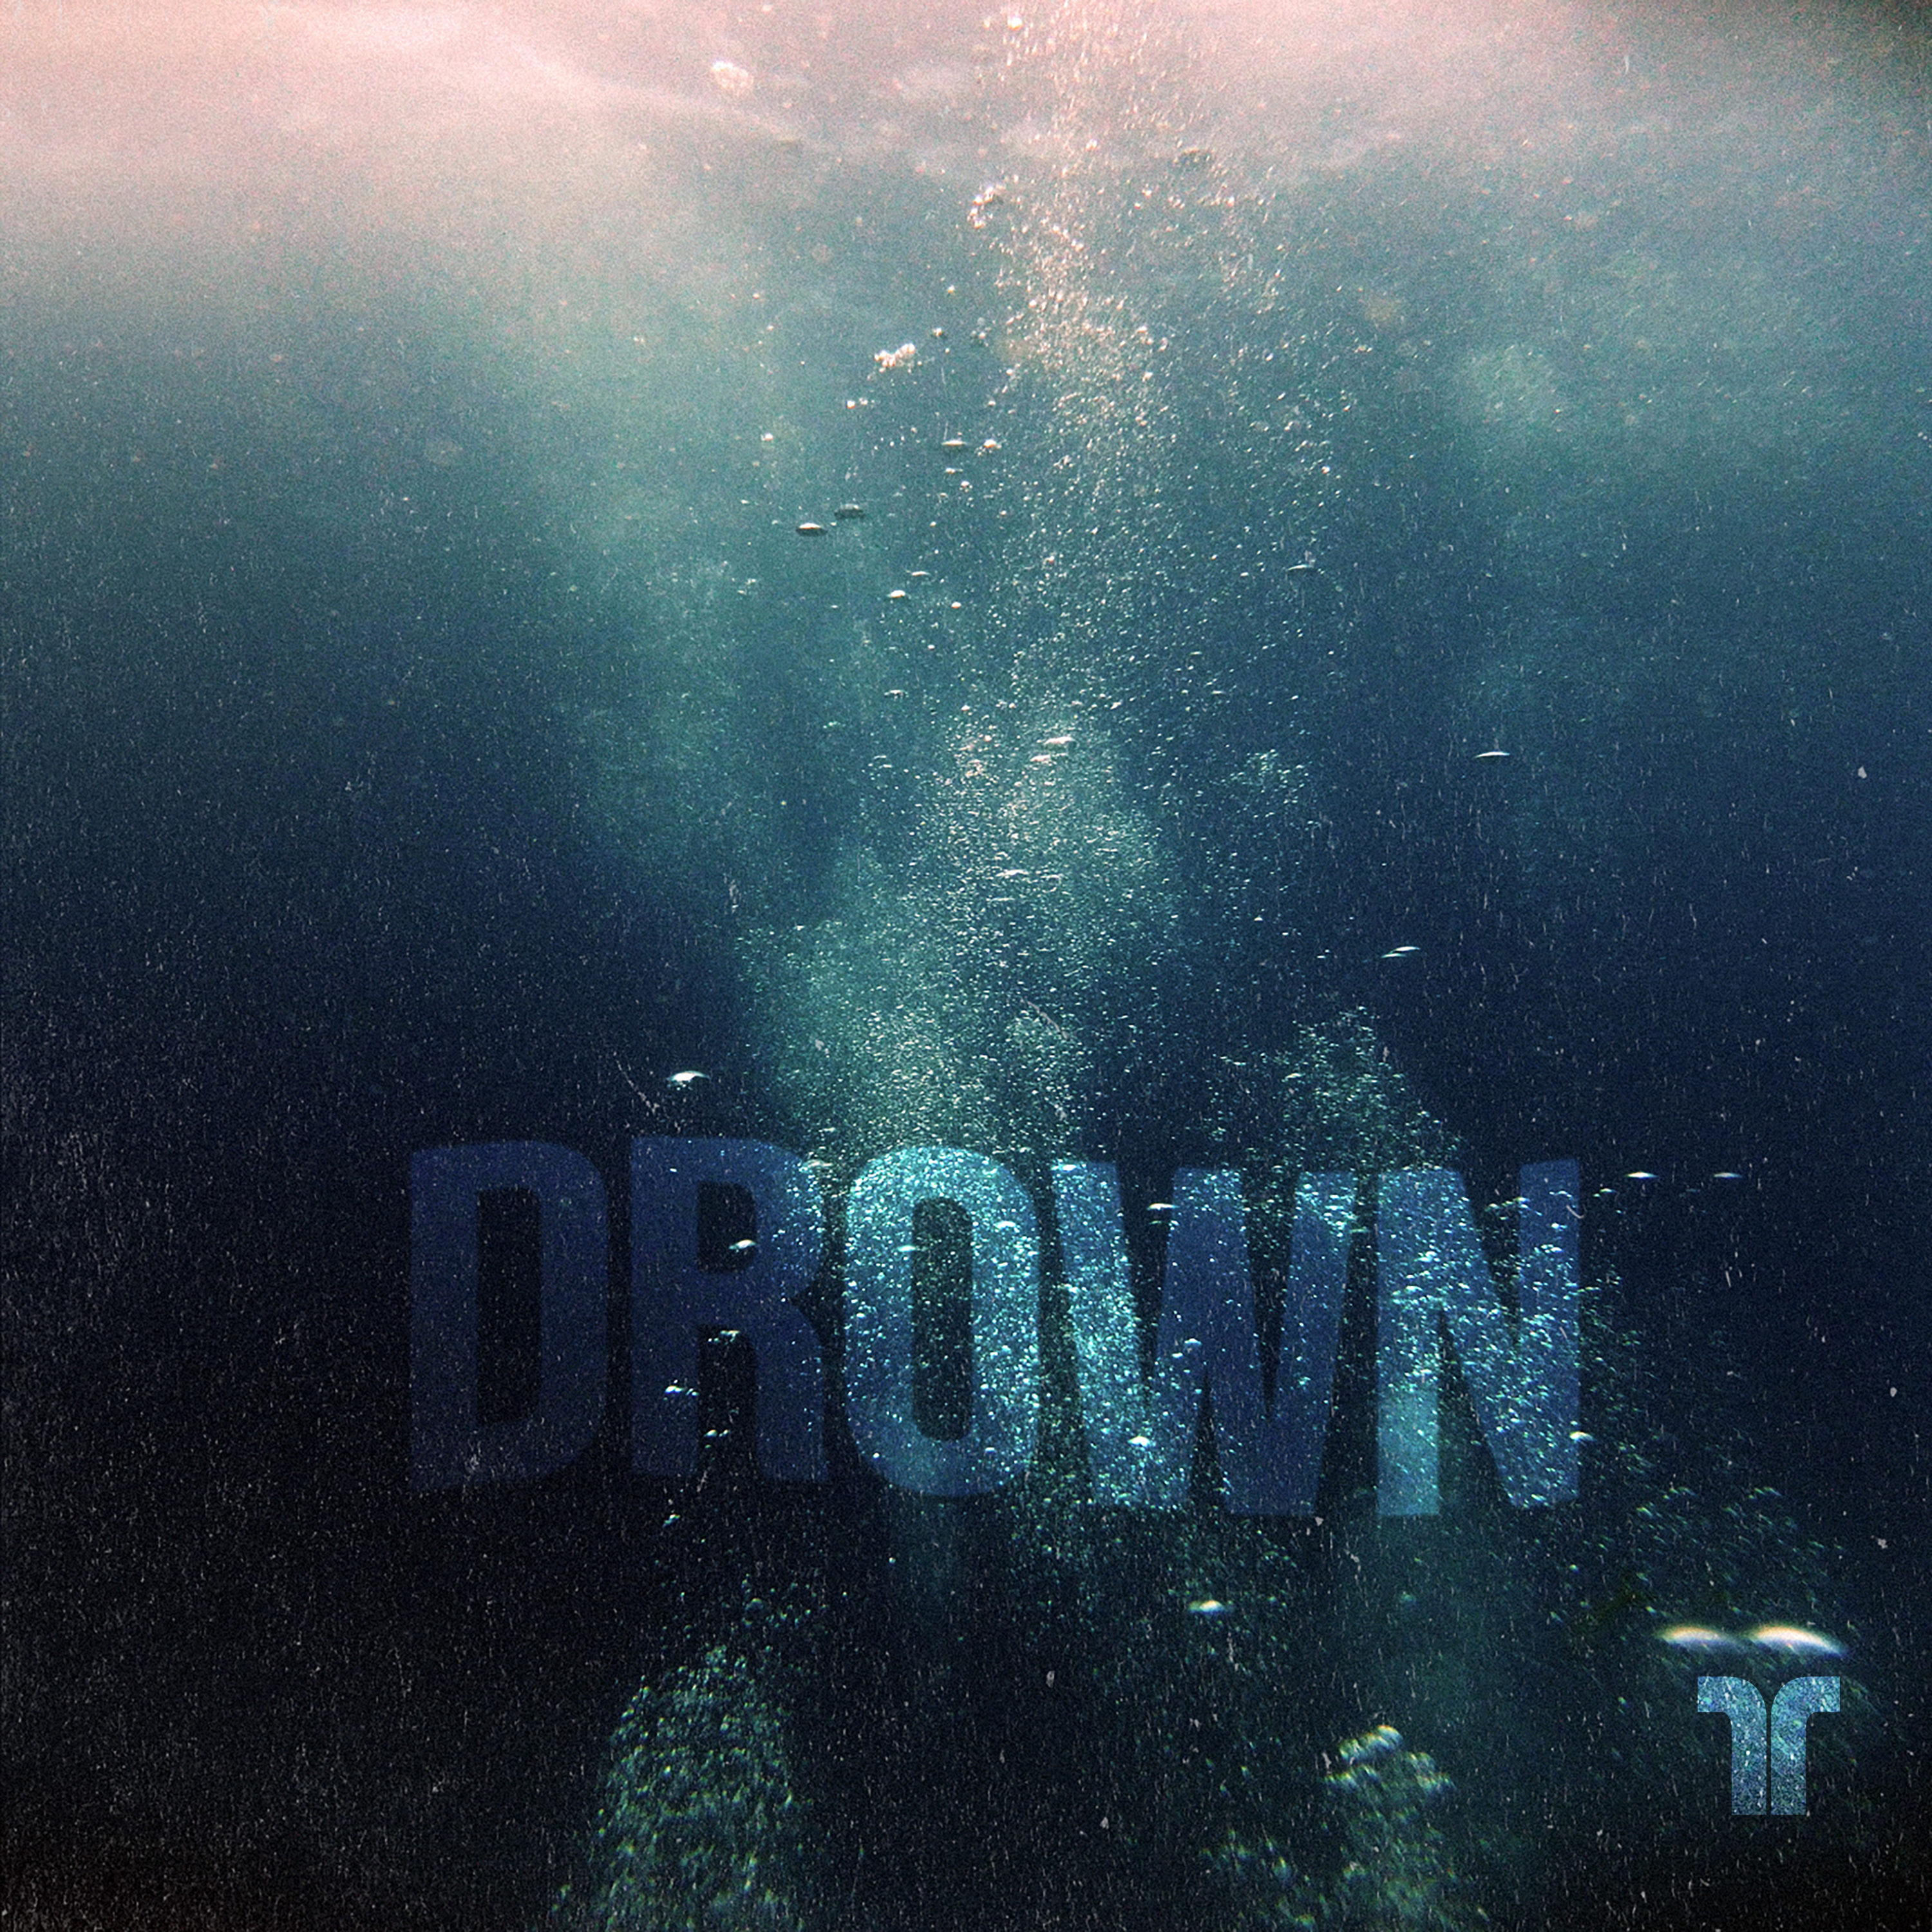 4B Explores the Depths of a New Sound with “Drown”